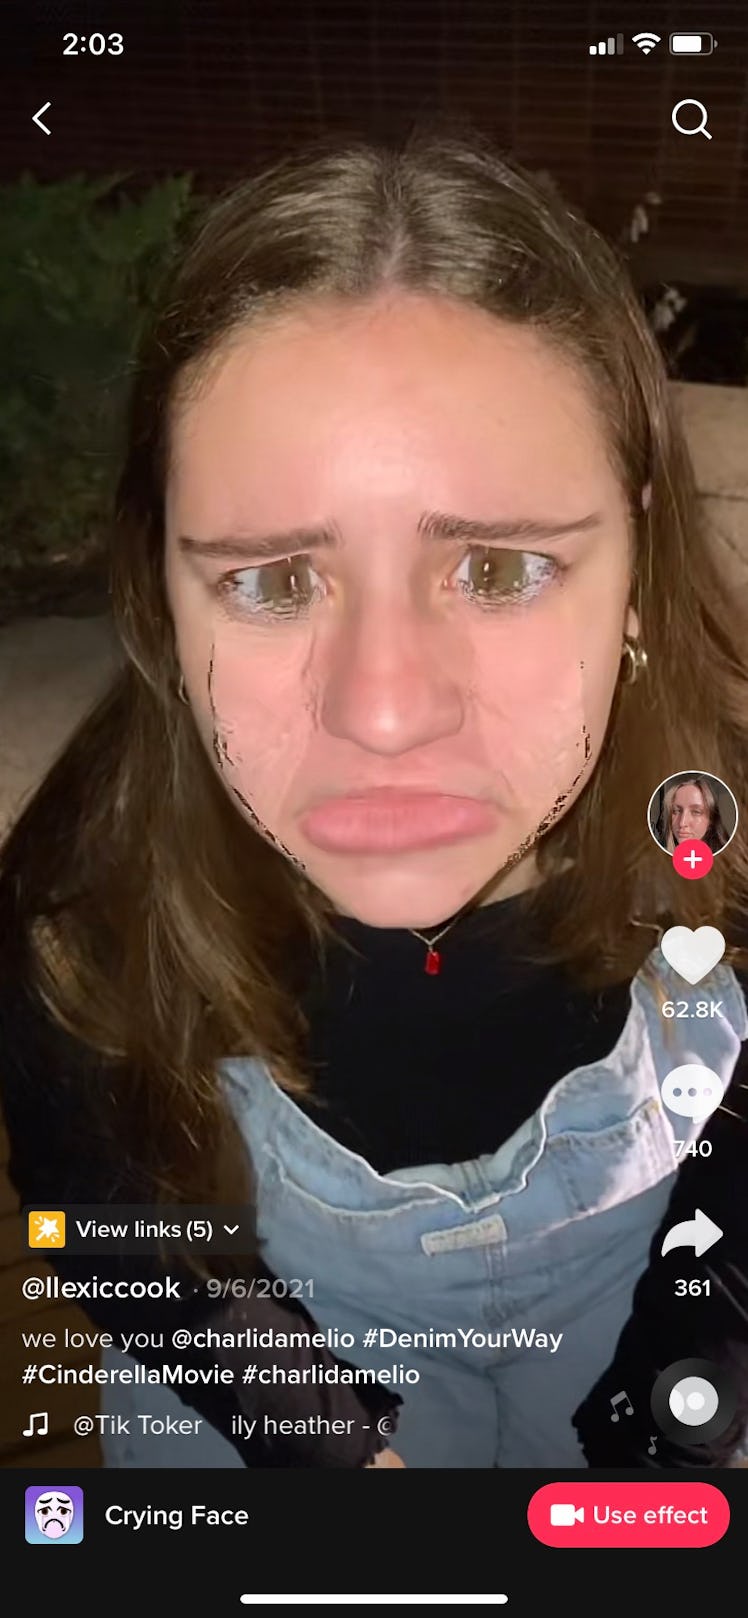 Check out all these crying face filters on TikTok, Instagram, and Snapchat.